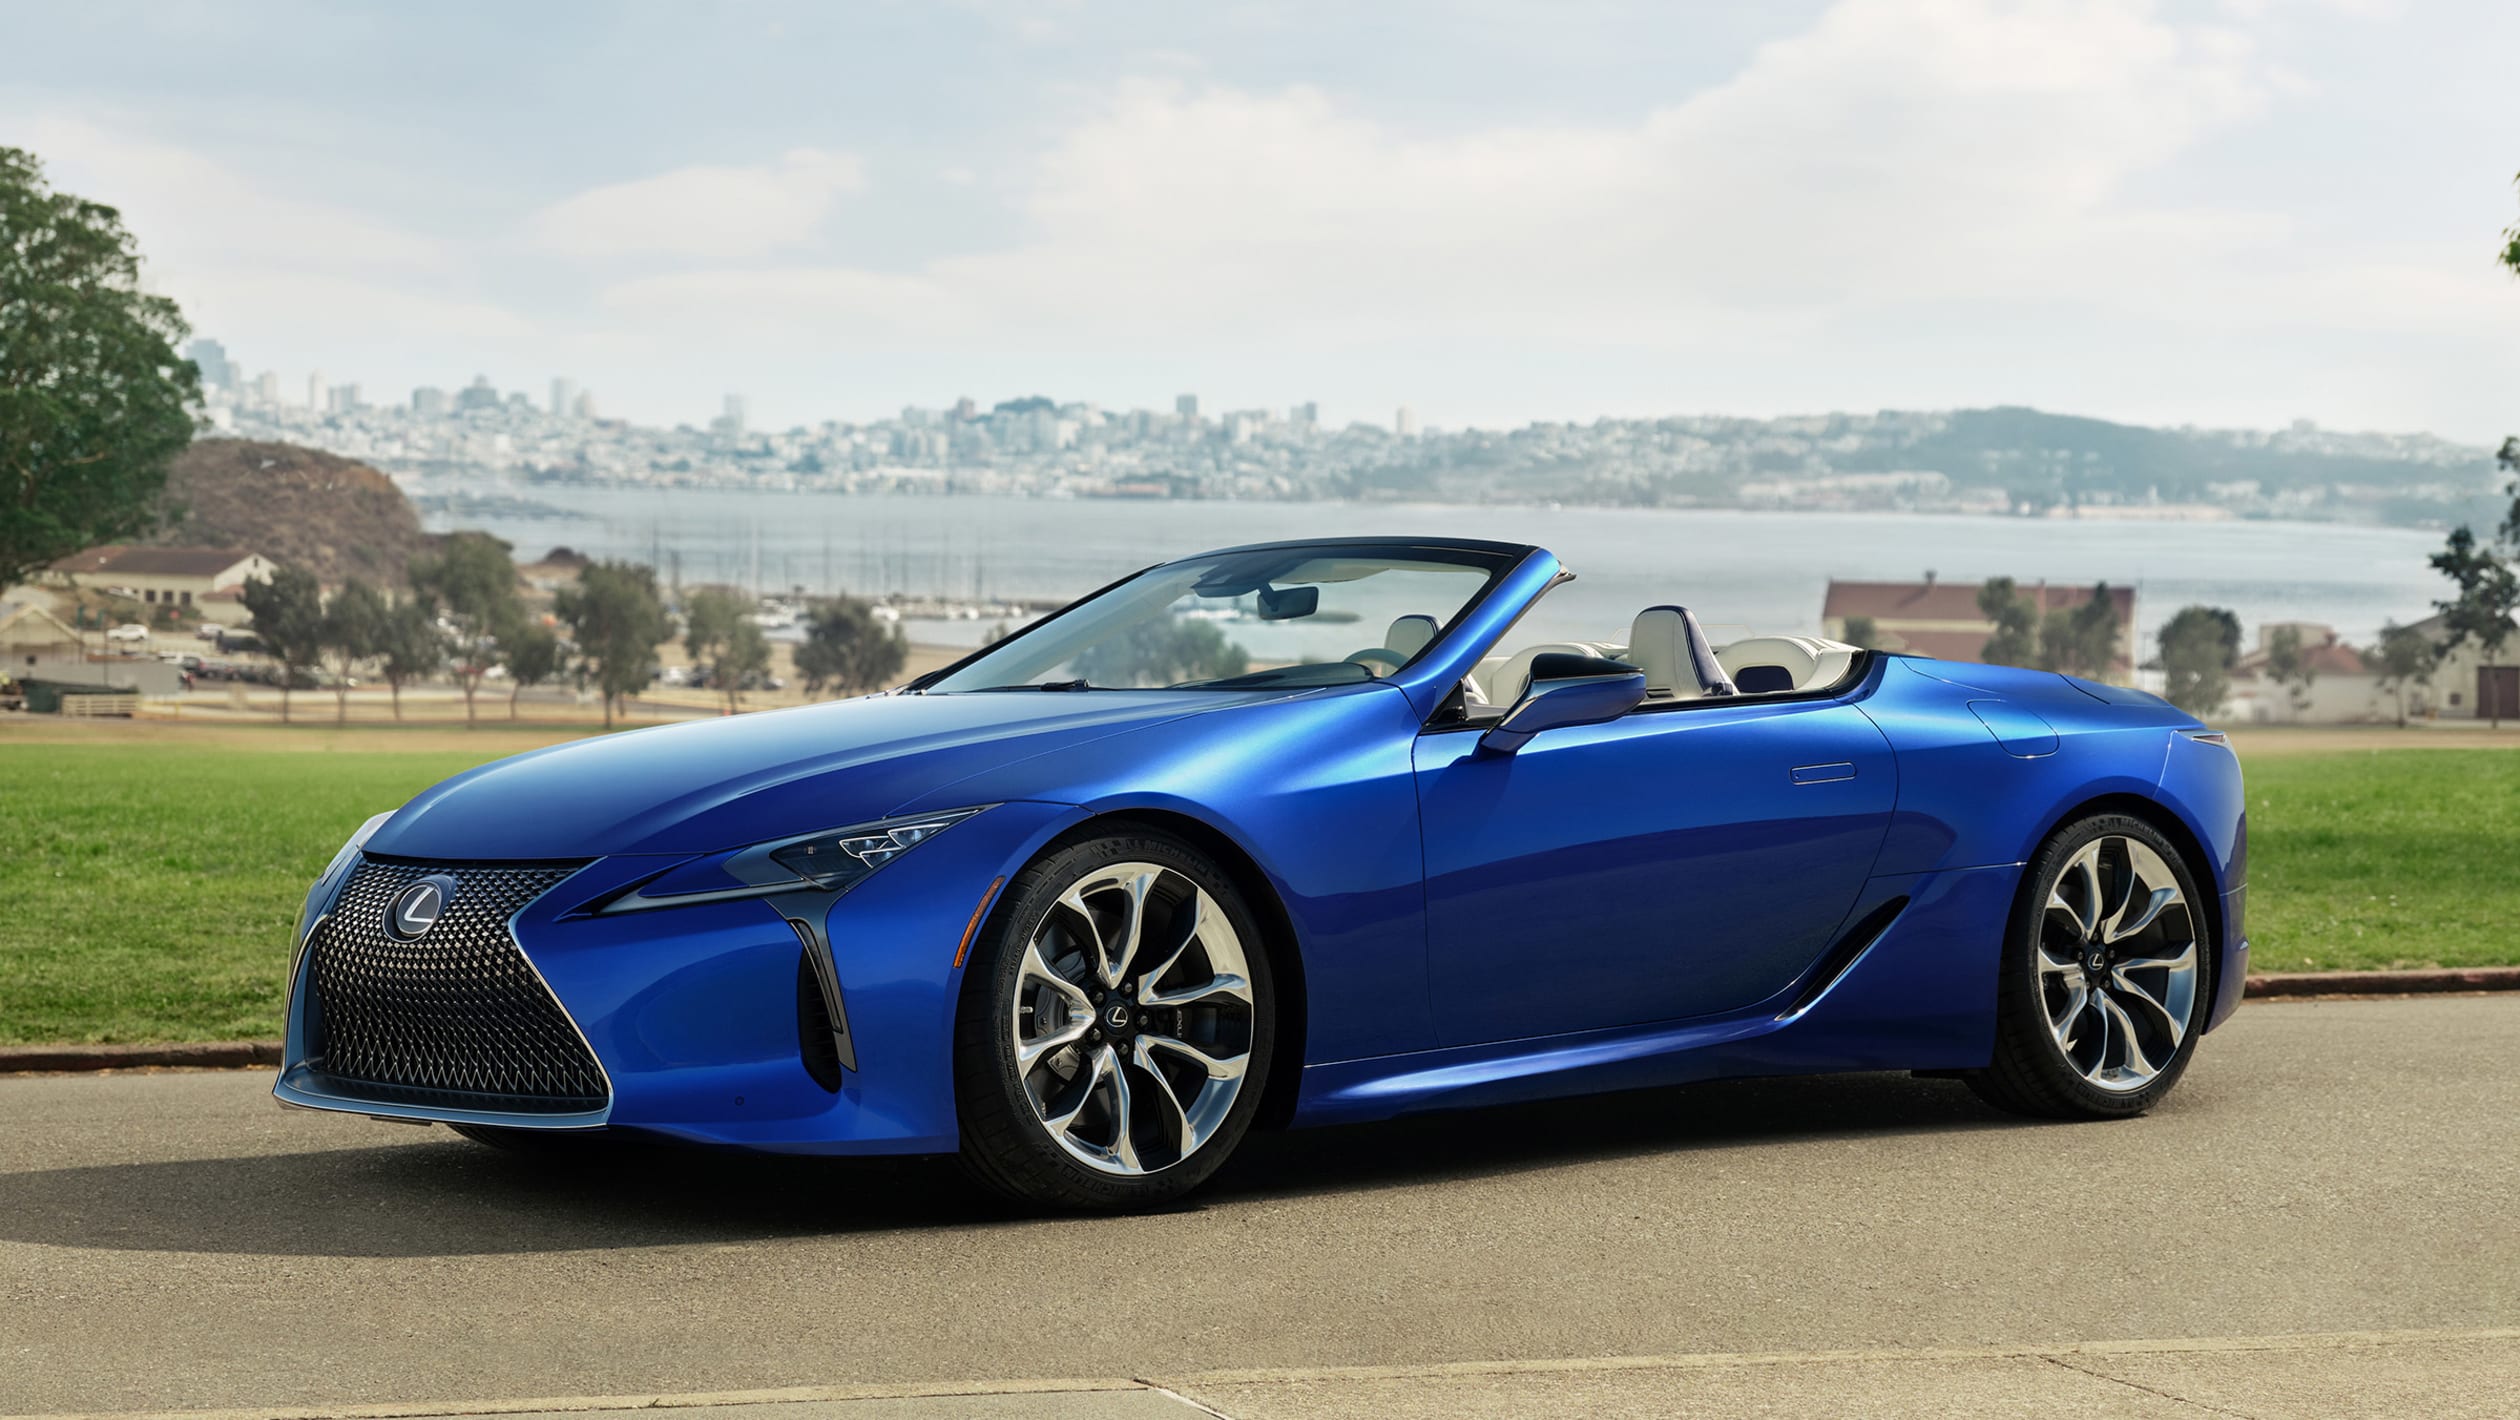 New Lexus LC 500 Convertible launched in LA pictures Auto Express